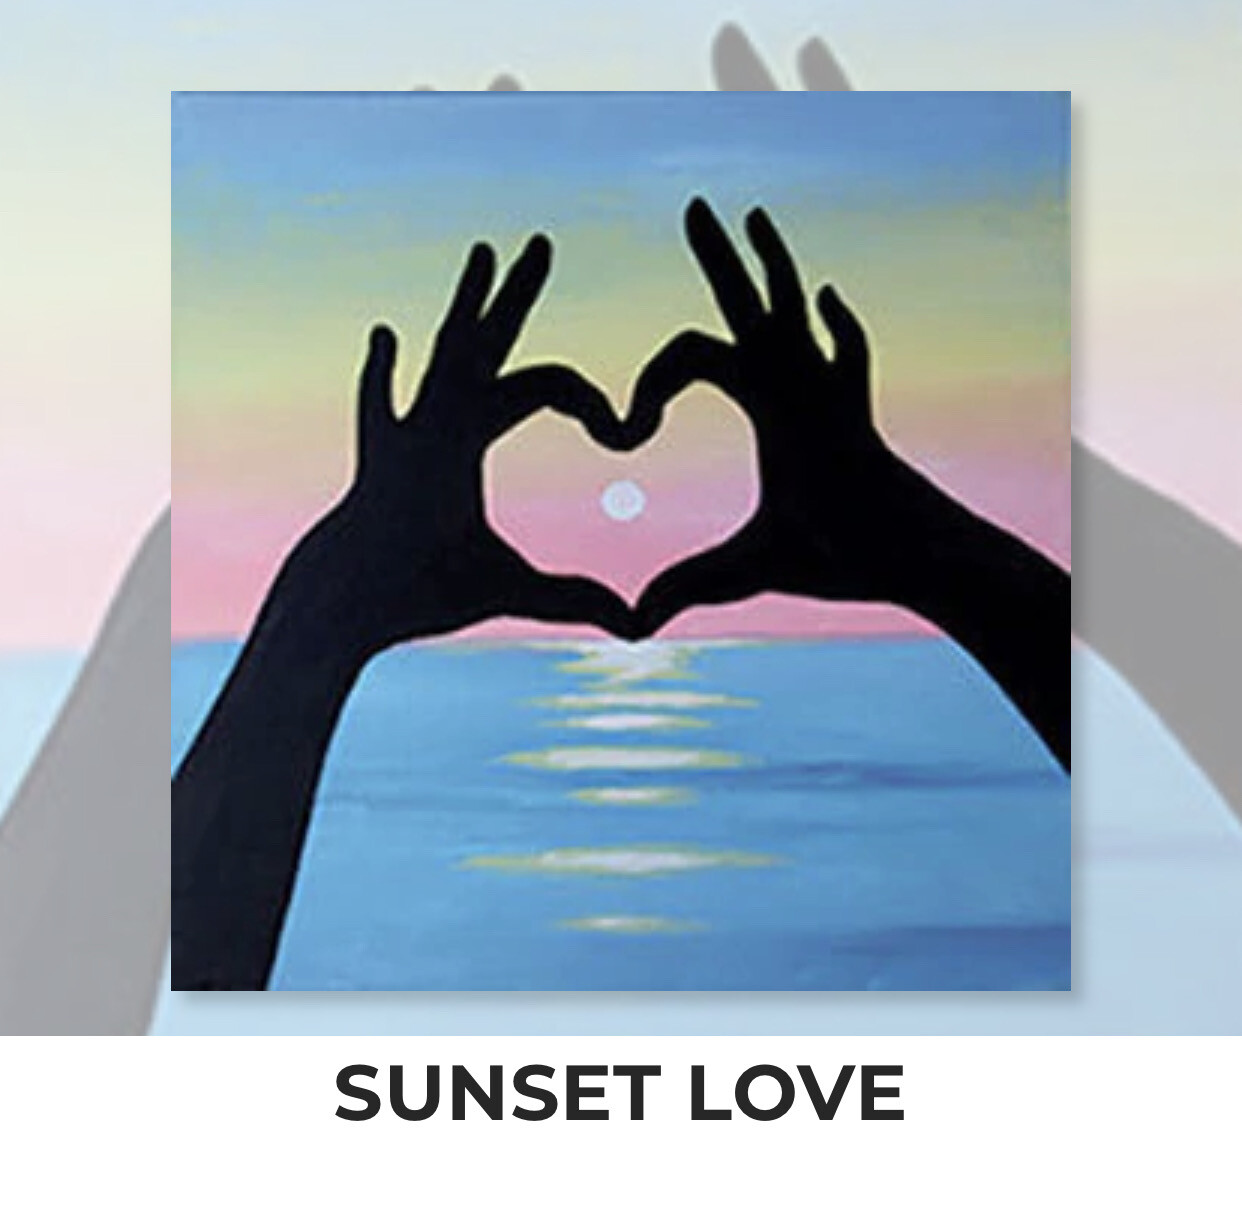 Sunset Love ADULT OR TWEEN Acrylic Paint On Canvas DIY Art Kit - 3 Week Special Order